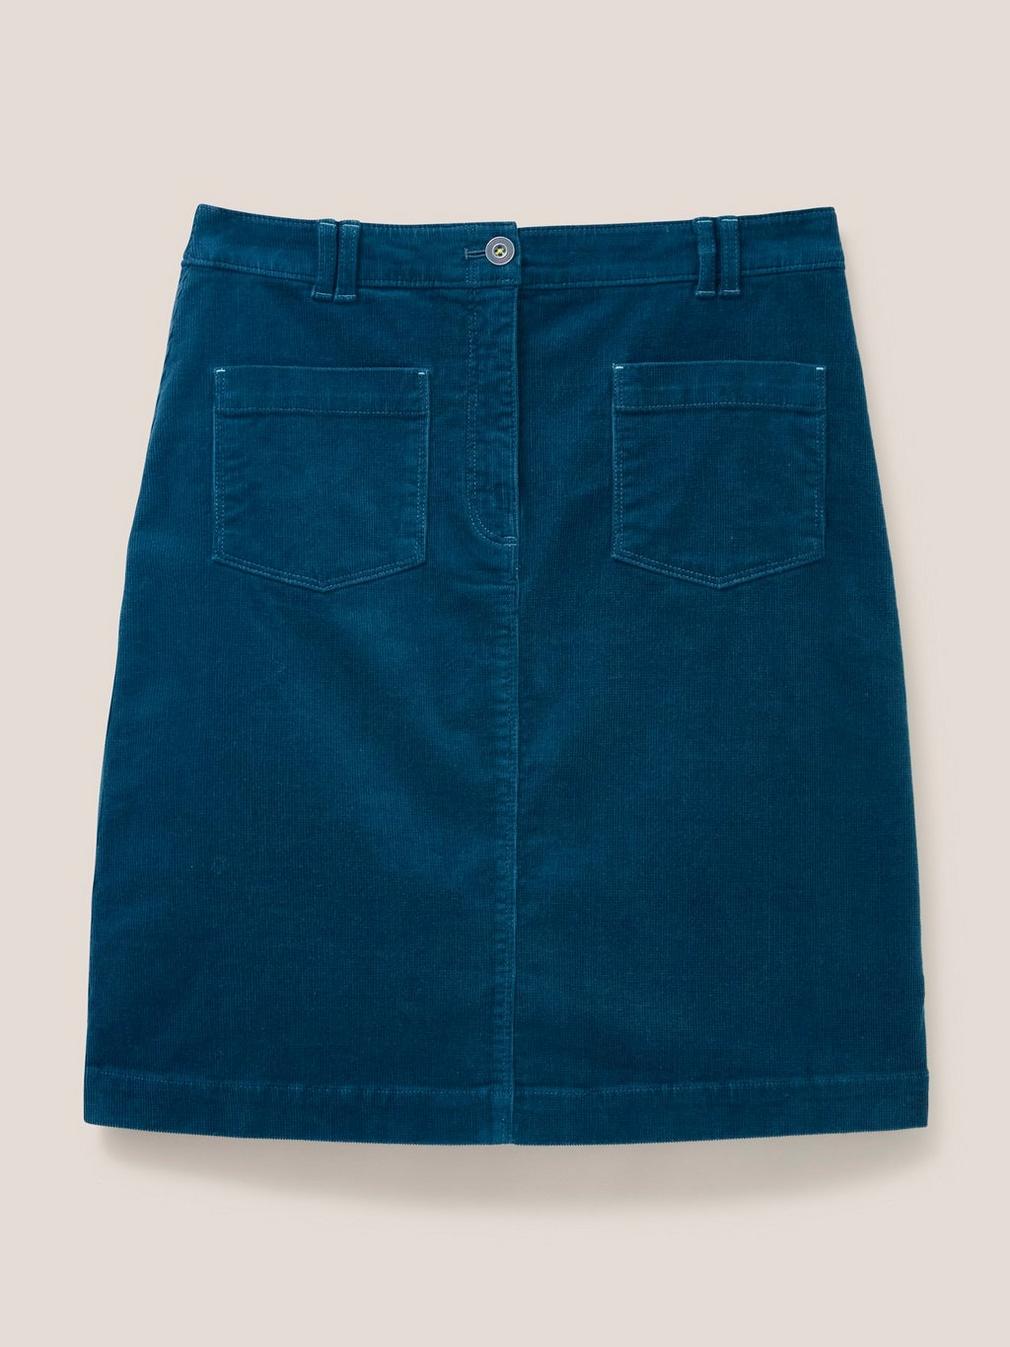 Melody Organic Cord Skirt in DK TEAL - FLAT FRONT